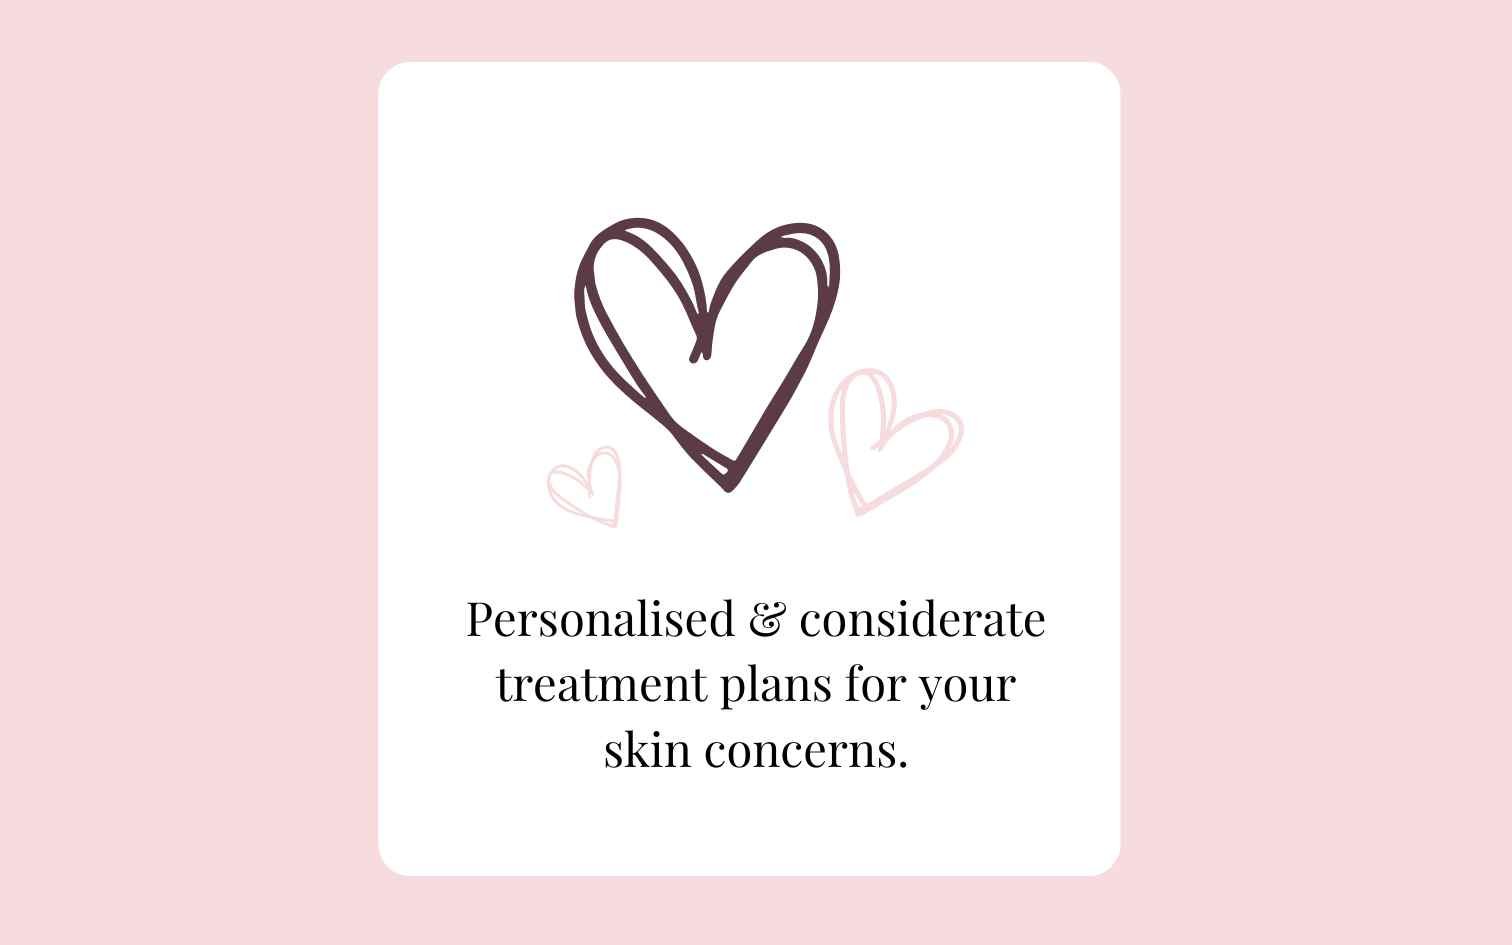 Personalised & considerate treatment plans for your skin concerns